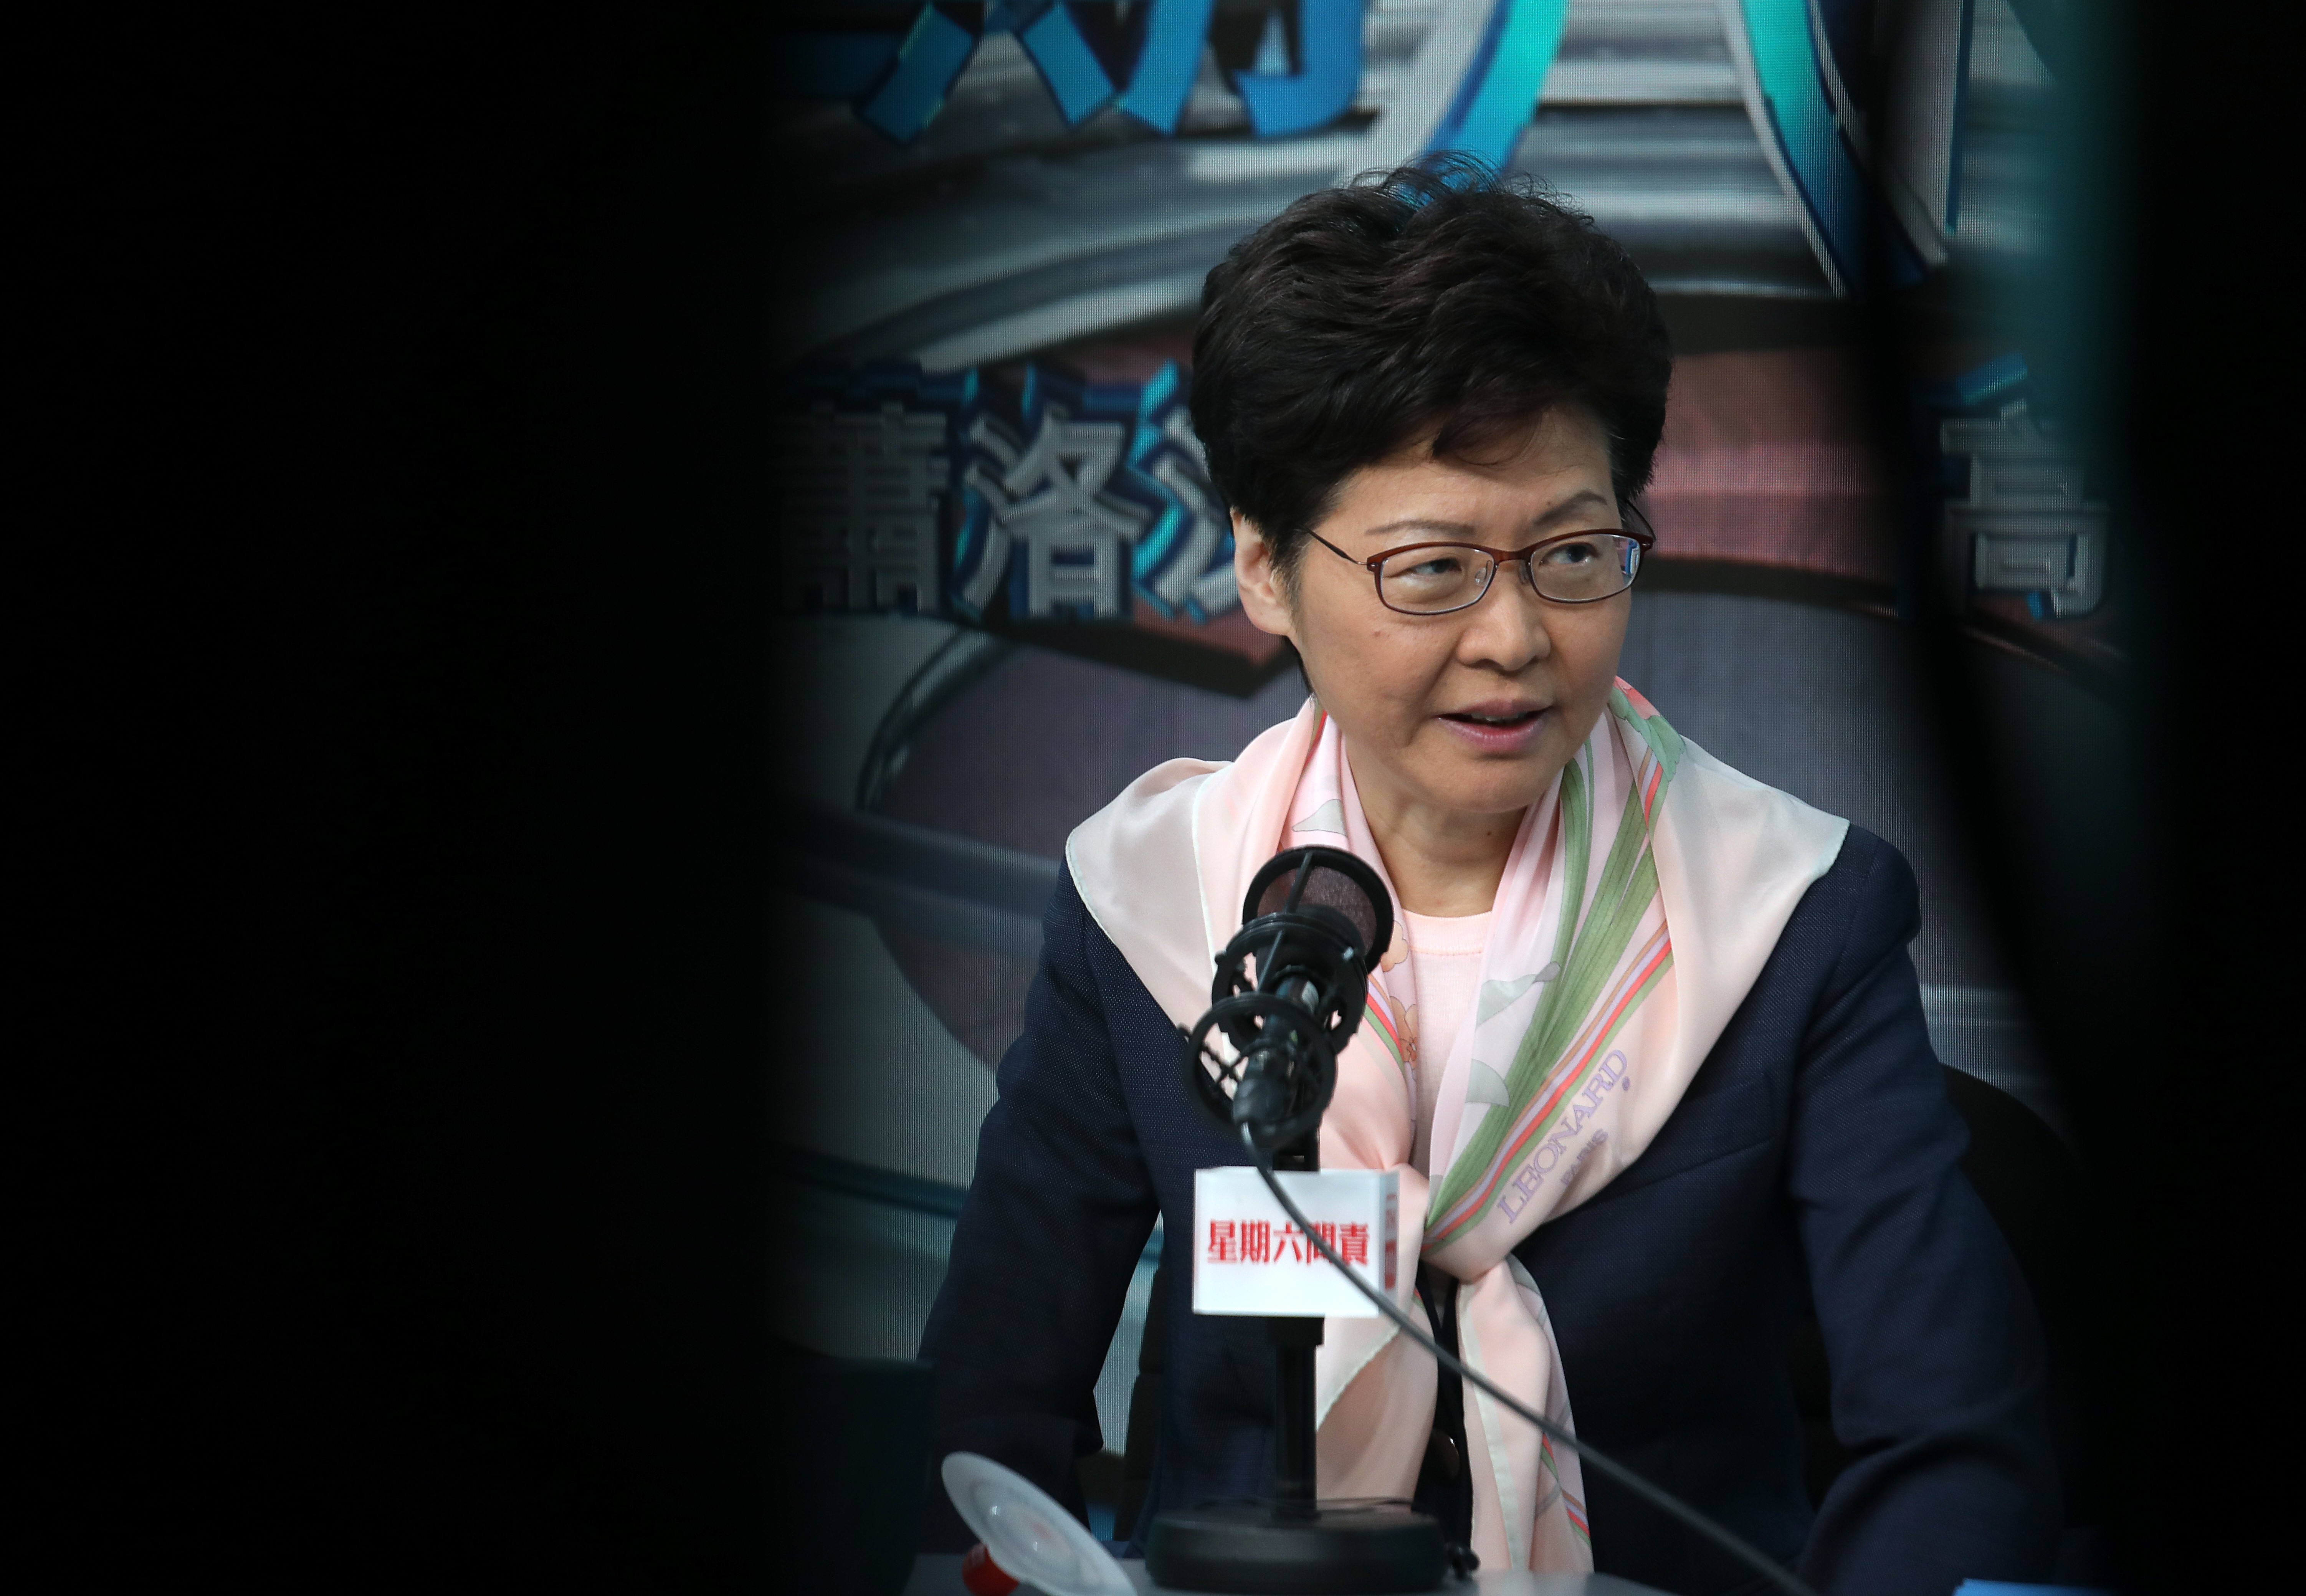 Carrie Lam has backed one of her advisers following conflict of interest concerns raised over property purchases made by his family. Photo: Xiaomei Chen